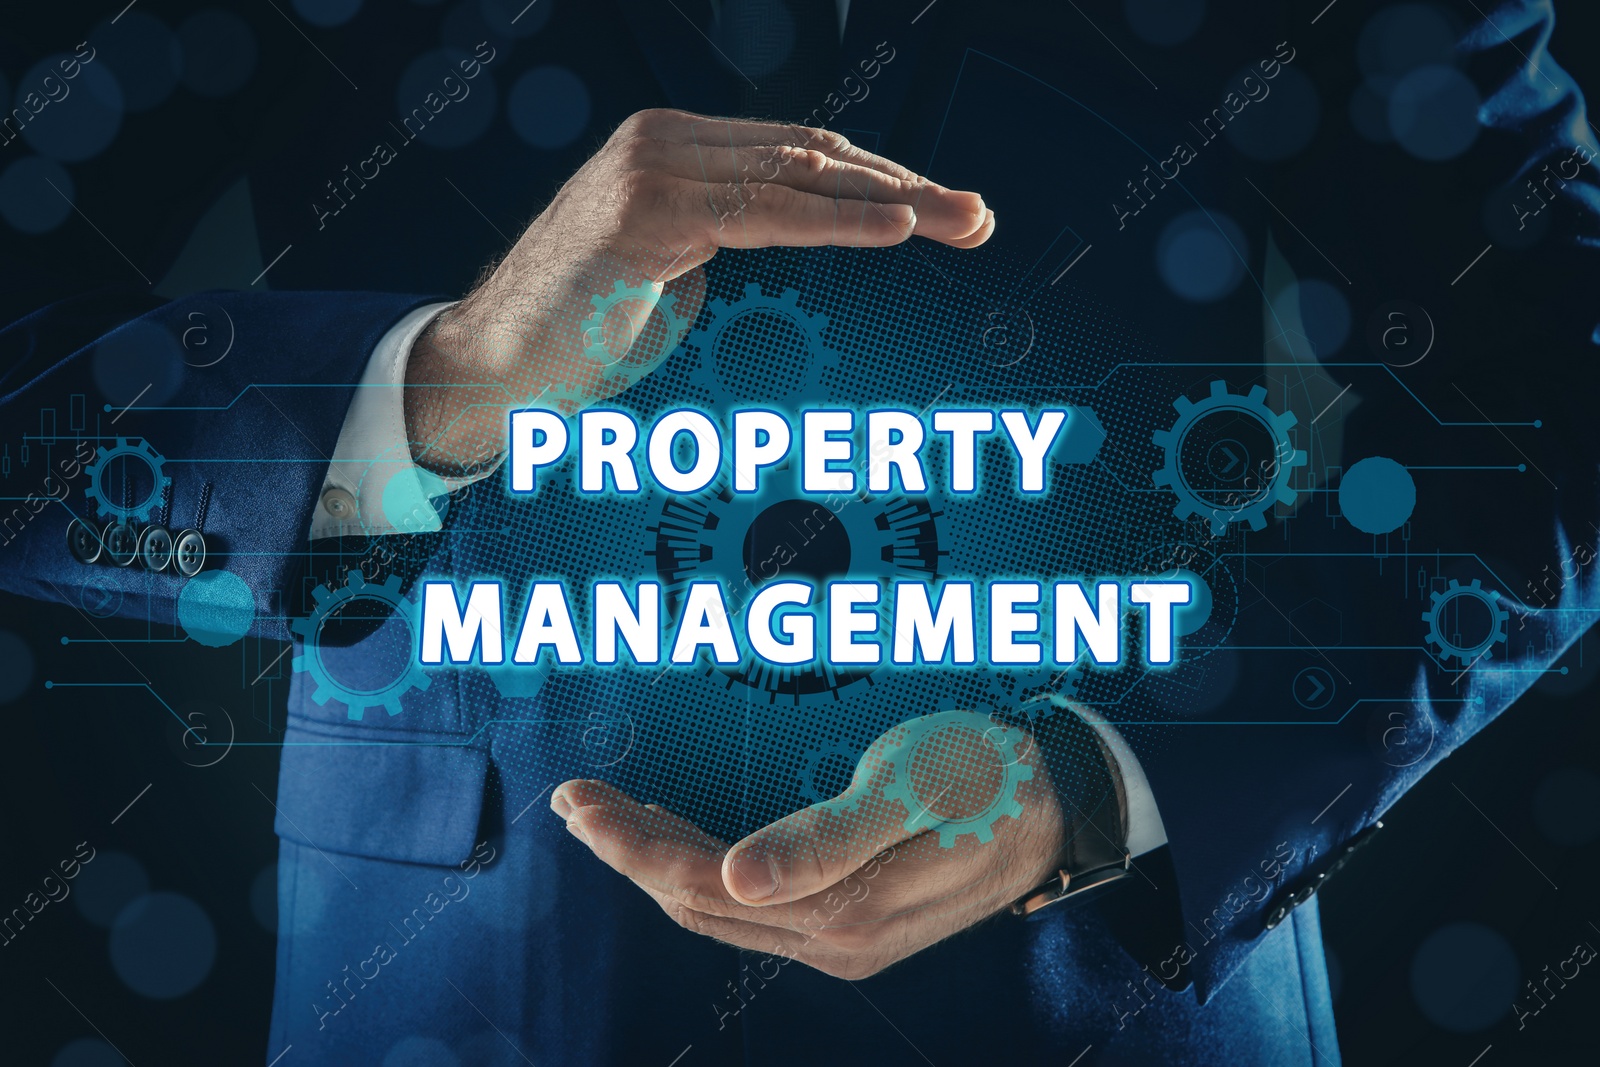 Image of Man demonstrating text Property Management and gear images on dark background, closeup